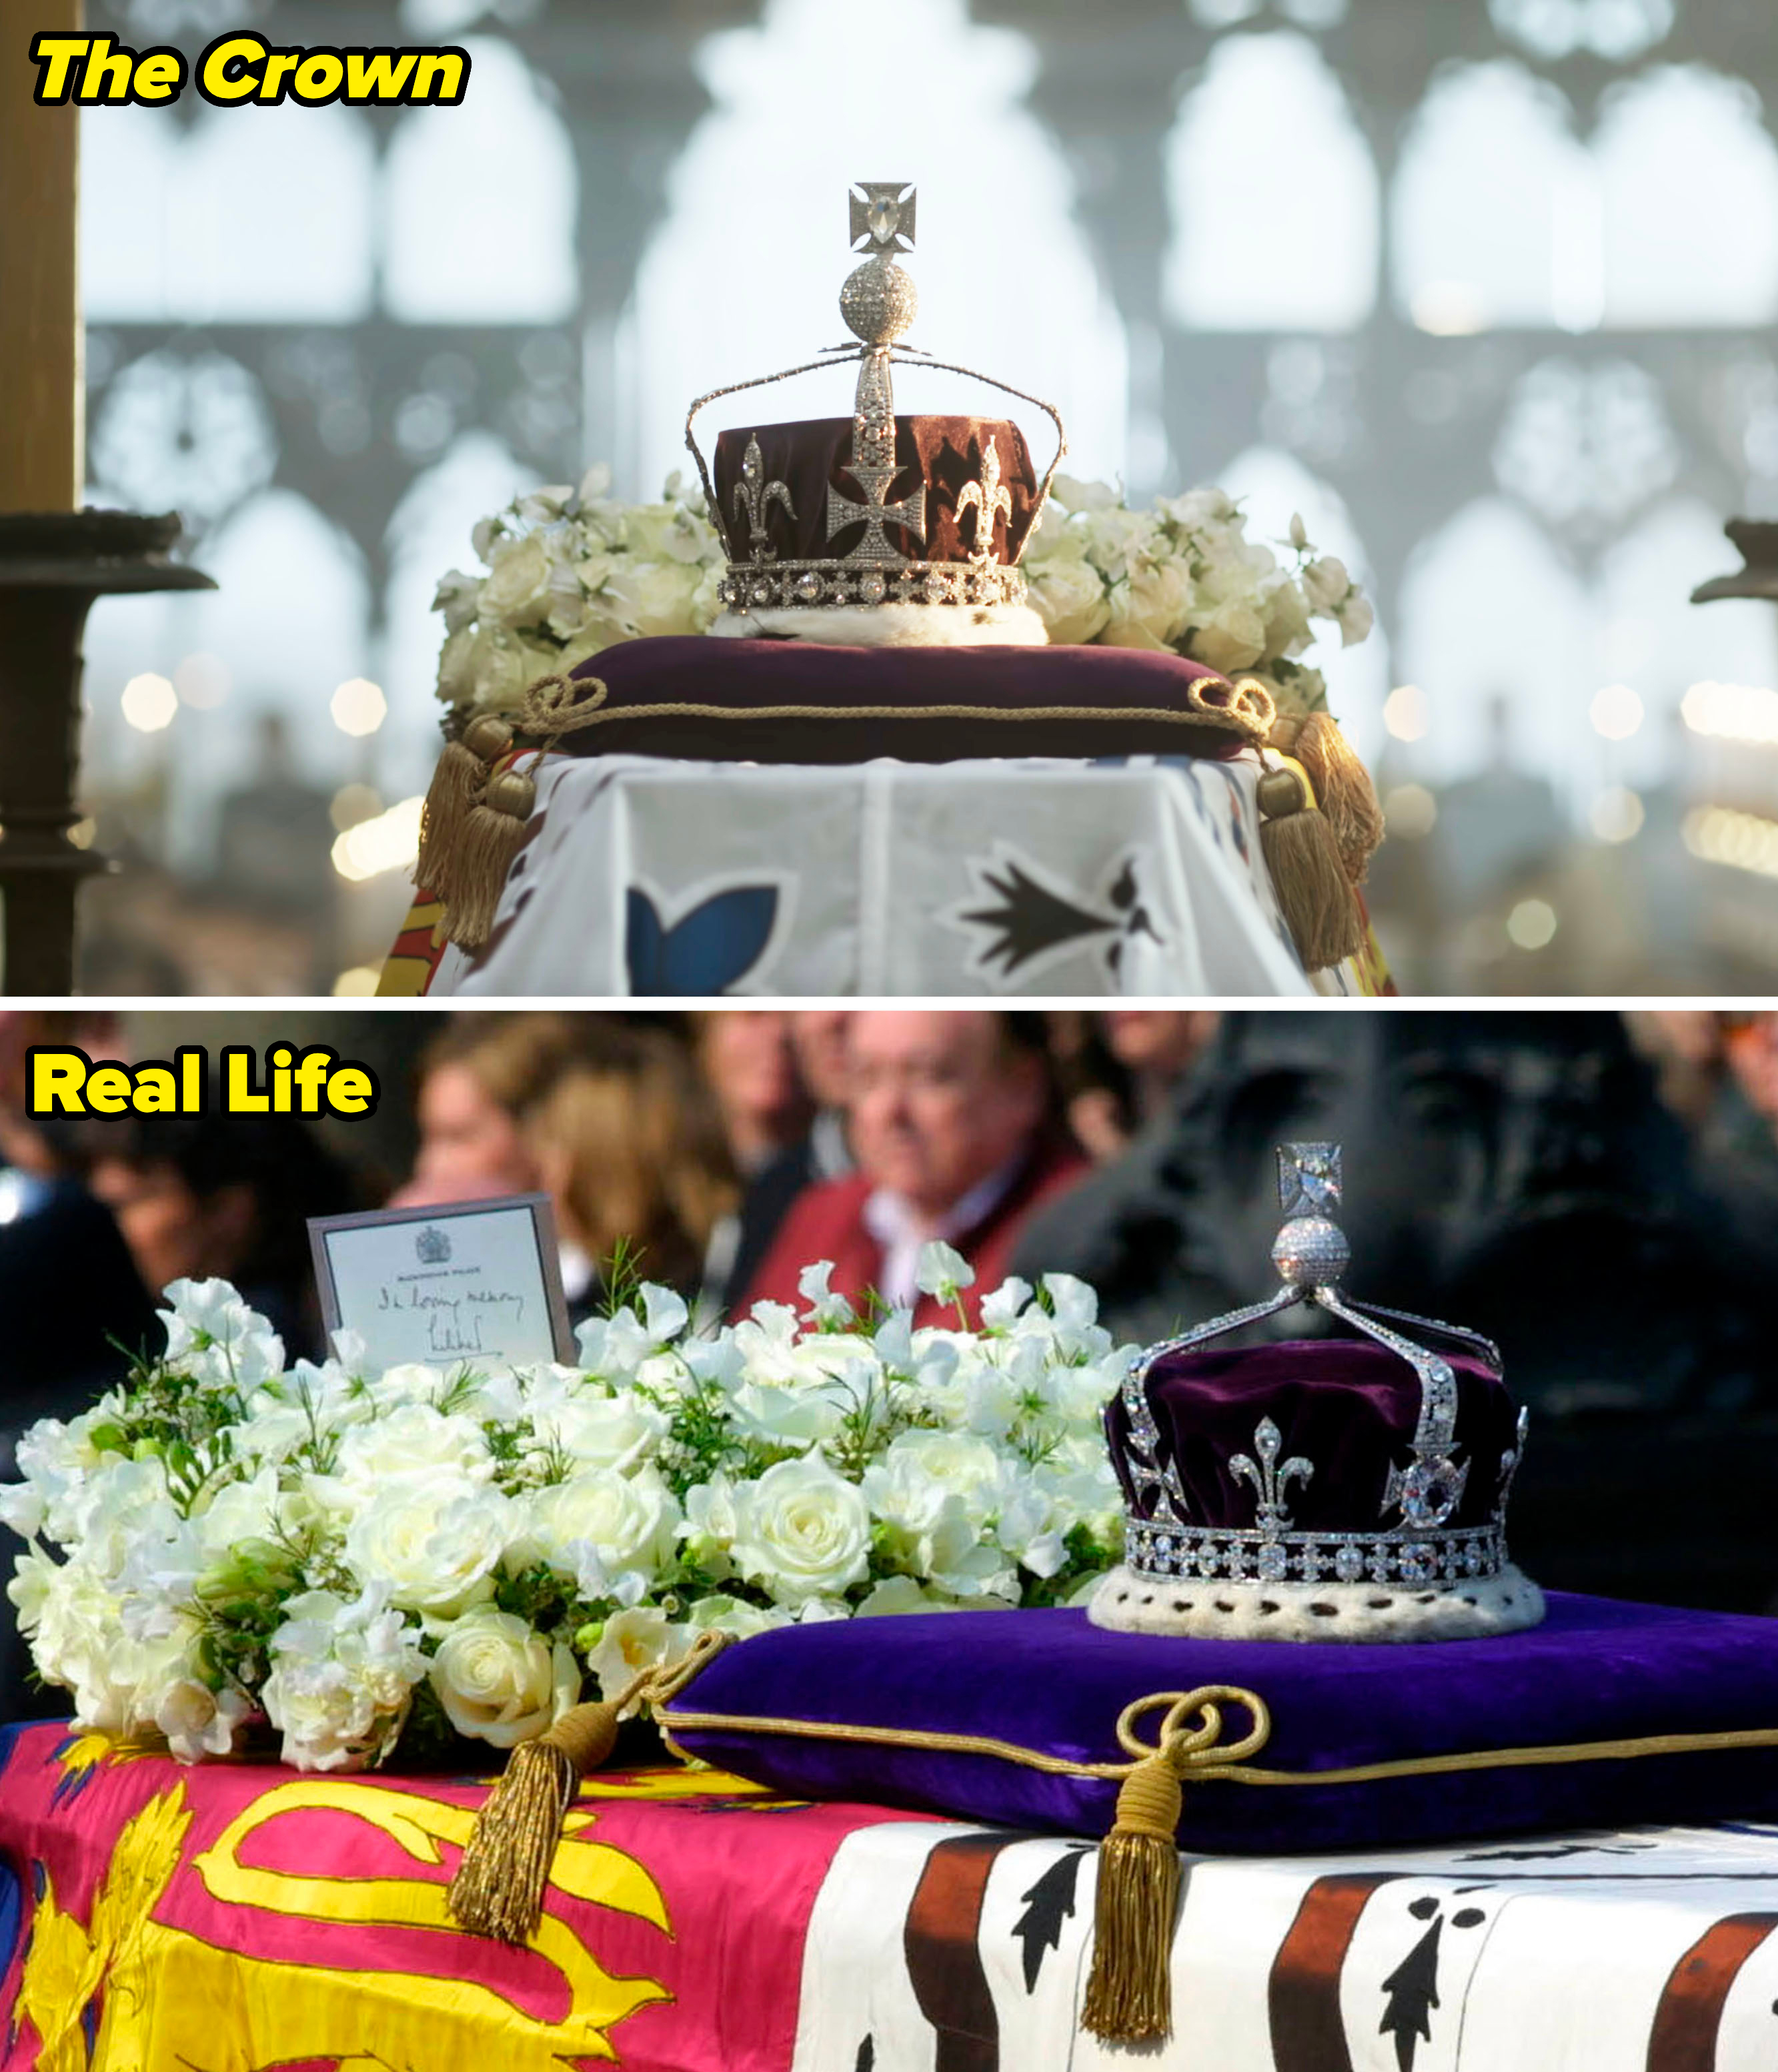 The Queen Mother&#x27;s casket in real life vs. &quot;The Crown&quot;